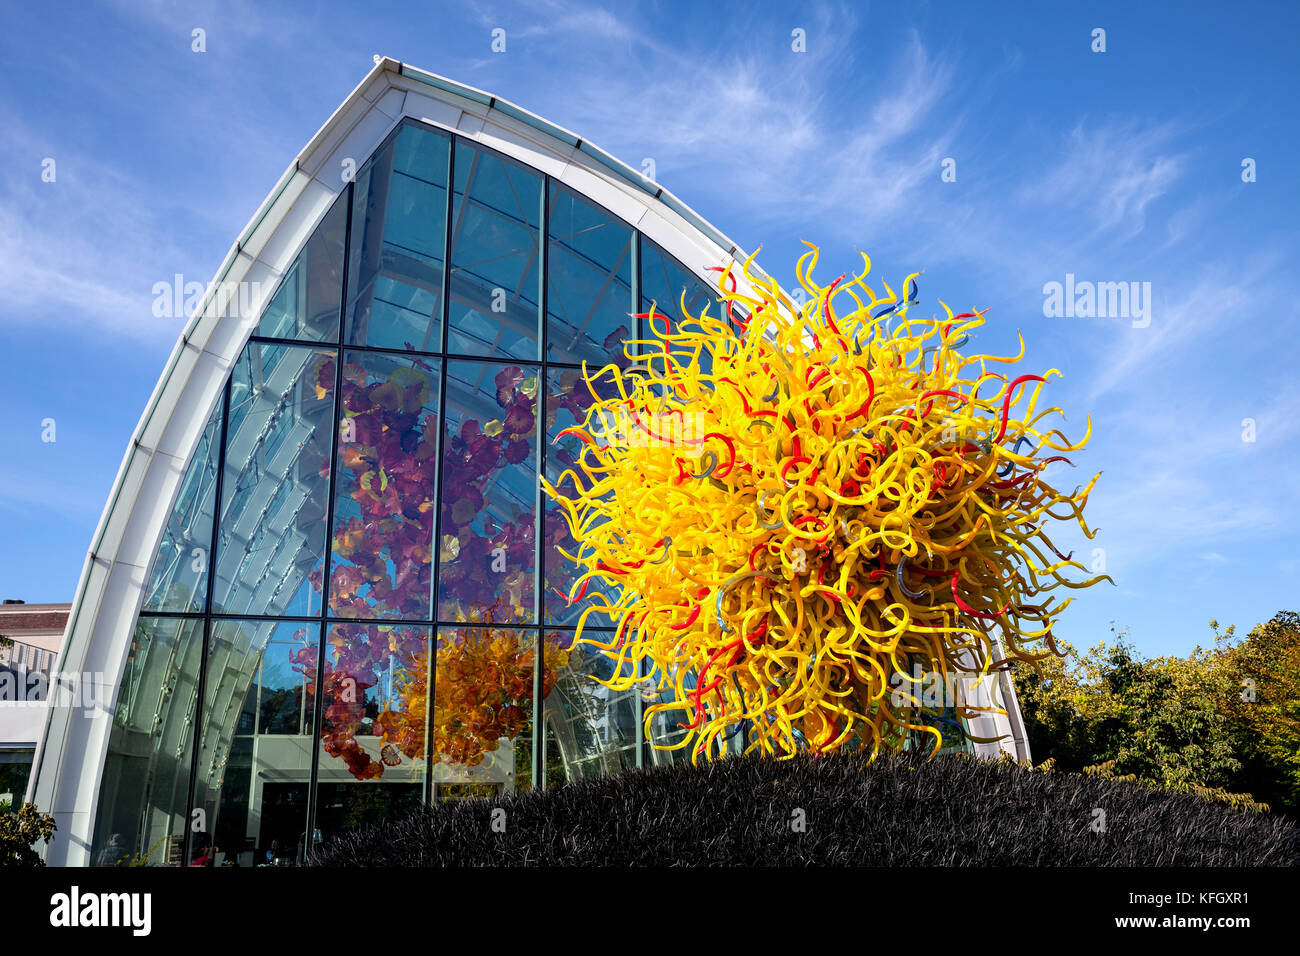 WA14136-00...WASHINGTON - View of glass work at the Chihuly Garden And Glass located in the Seattle Center. Stock Photo